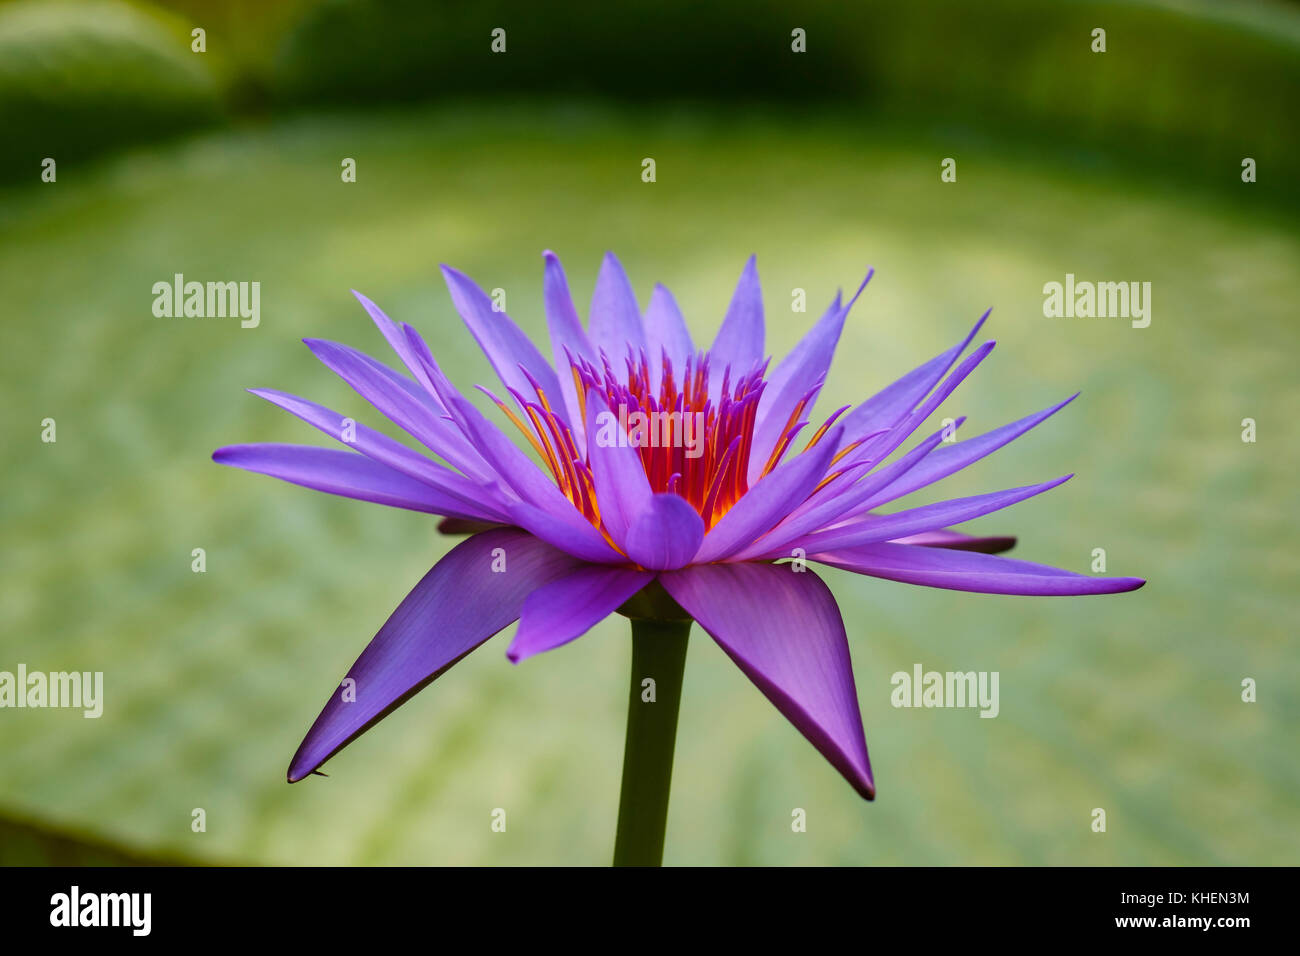 Flower of a water lily (Nymhaea Hybrid August Koch), Stock Photo